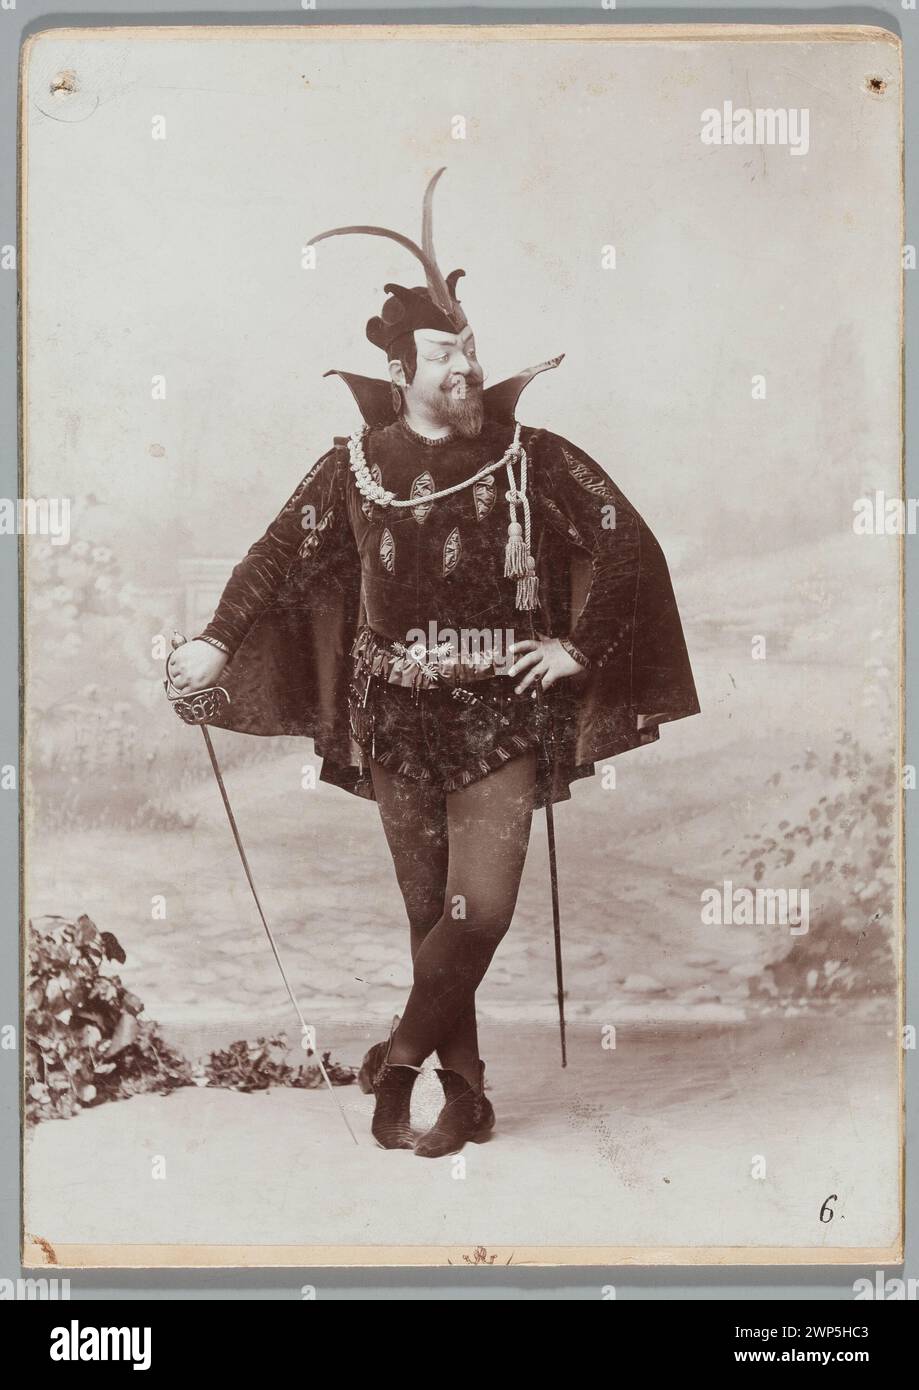 Portrait of Edward Reszke (1853-1917), Piwak, in a stage costume, in the role of MEFIST at the 'Faust' opera of Charles Gount at the Grand Theater in Warsaw; Mieczkowski, Jan (Warsaw; photographic Zak 1893 (1893-00-00-1893-00-00);Gounod, Charles (1818-1893). Faust, Mephisto (lit.), Rajchman, Aleksander (1855-1915)-collection, Reszke, Edward (1853-1917), Reszke, Edward (1853-1917)-iconography, Grand Theater (Warsaw), guitars, musical instruments, musical instruments, Theater costumes, opera (artist), portraits, men's portraits, theater (artist), singers Stock Photo